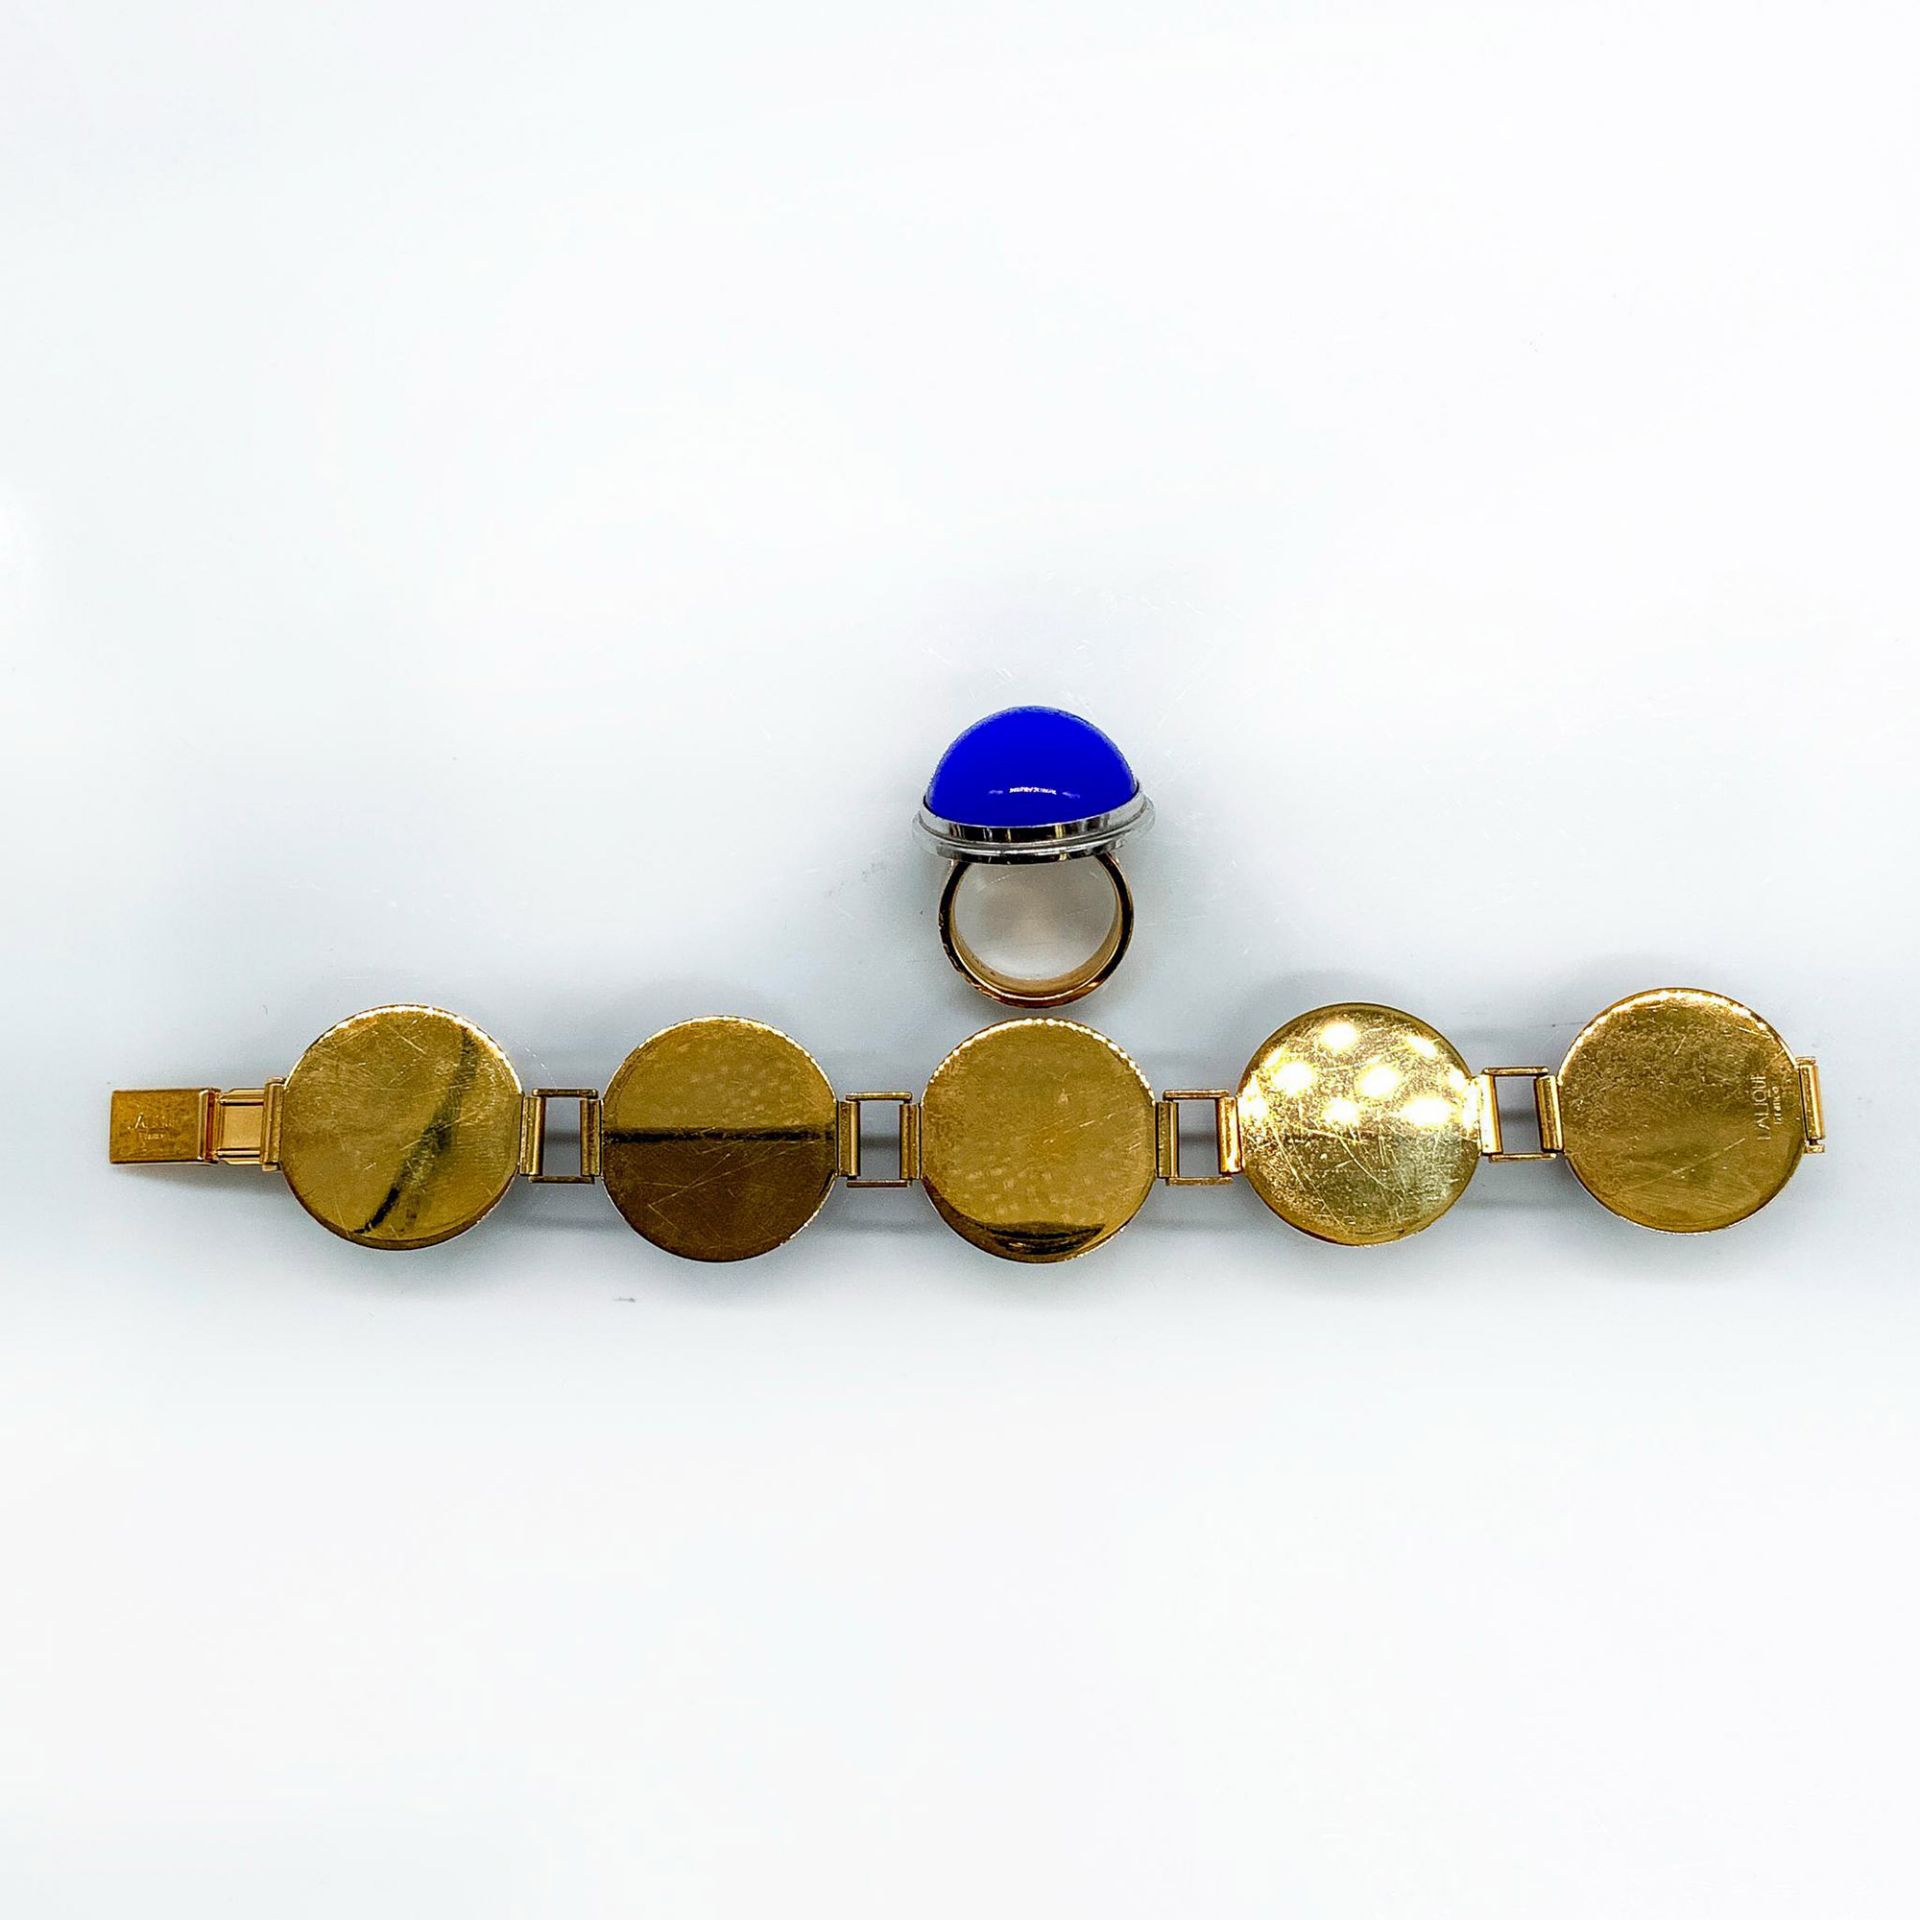 2pc Lalique Blue Cabochon Bracelet and 14K Gold Ring - Image 3 of 3